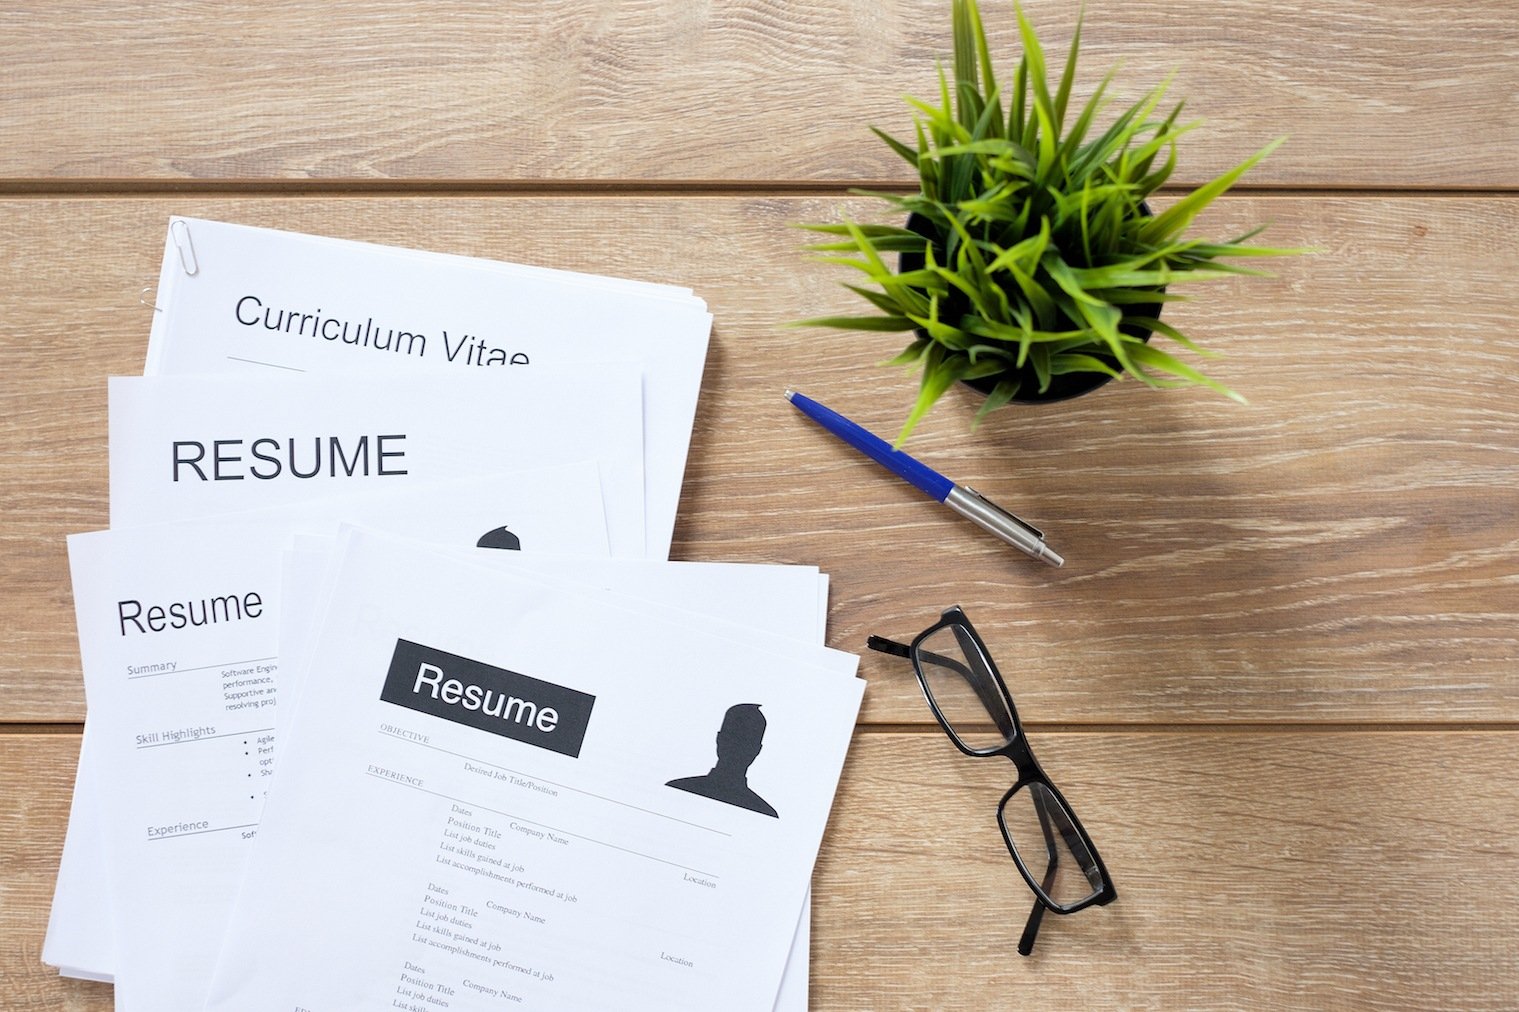 Here Are 15 Common Resume Mistakes You Must Avoid in 2018